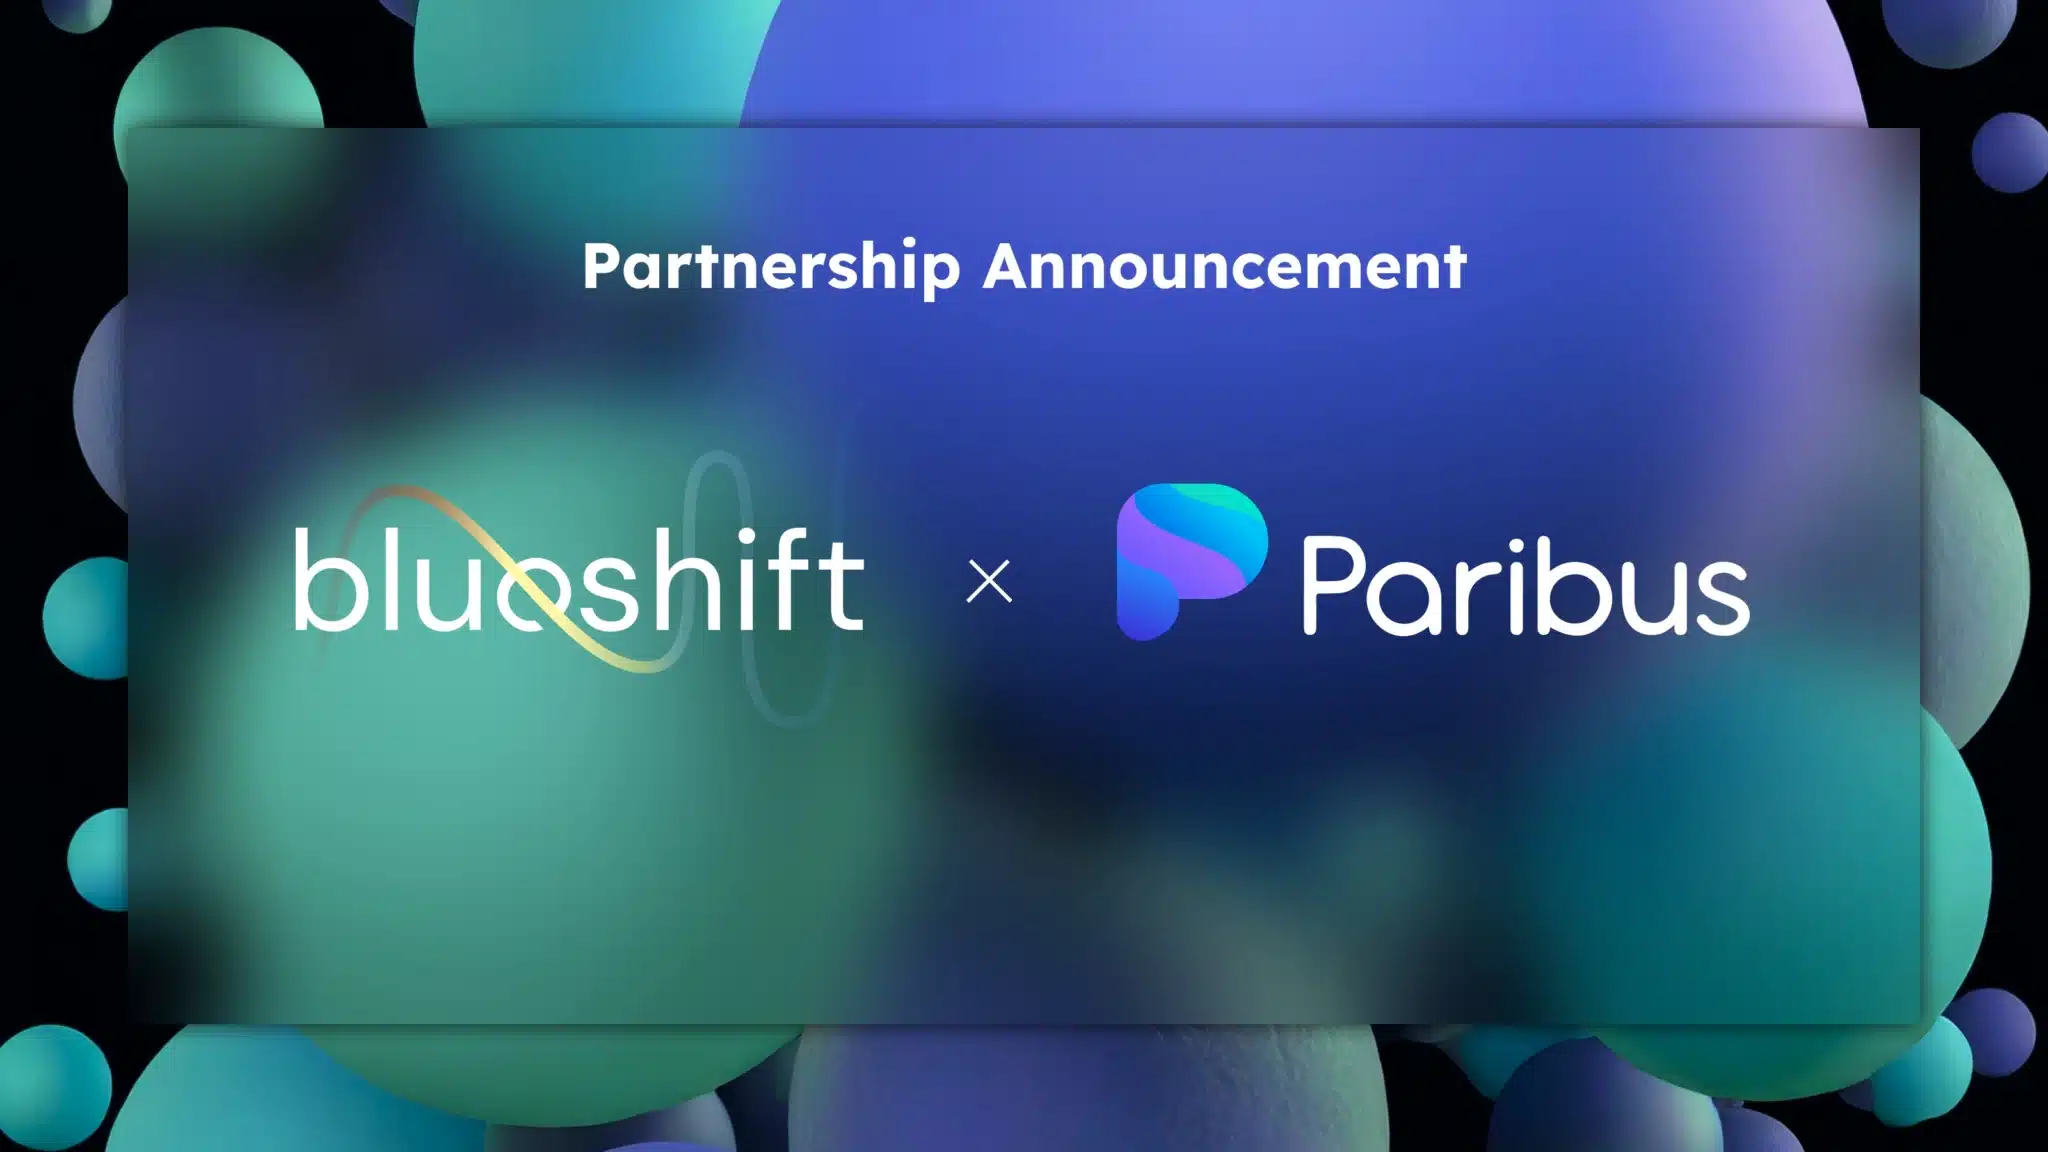 Introducing the Cardano Startup Index and our First Token Partner, Paribus!